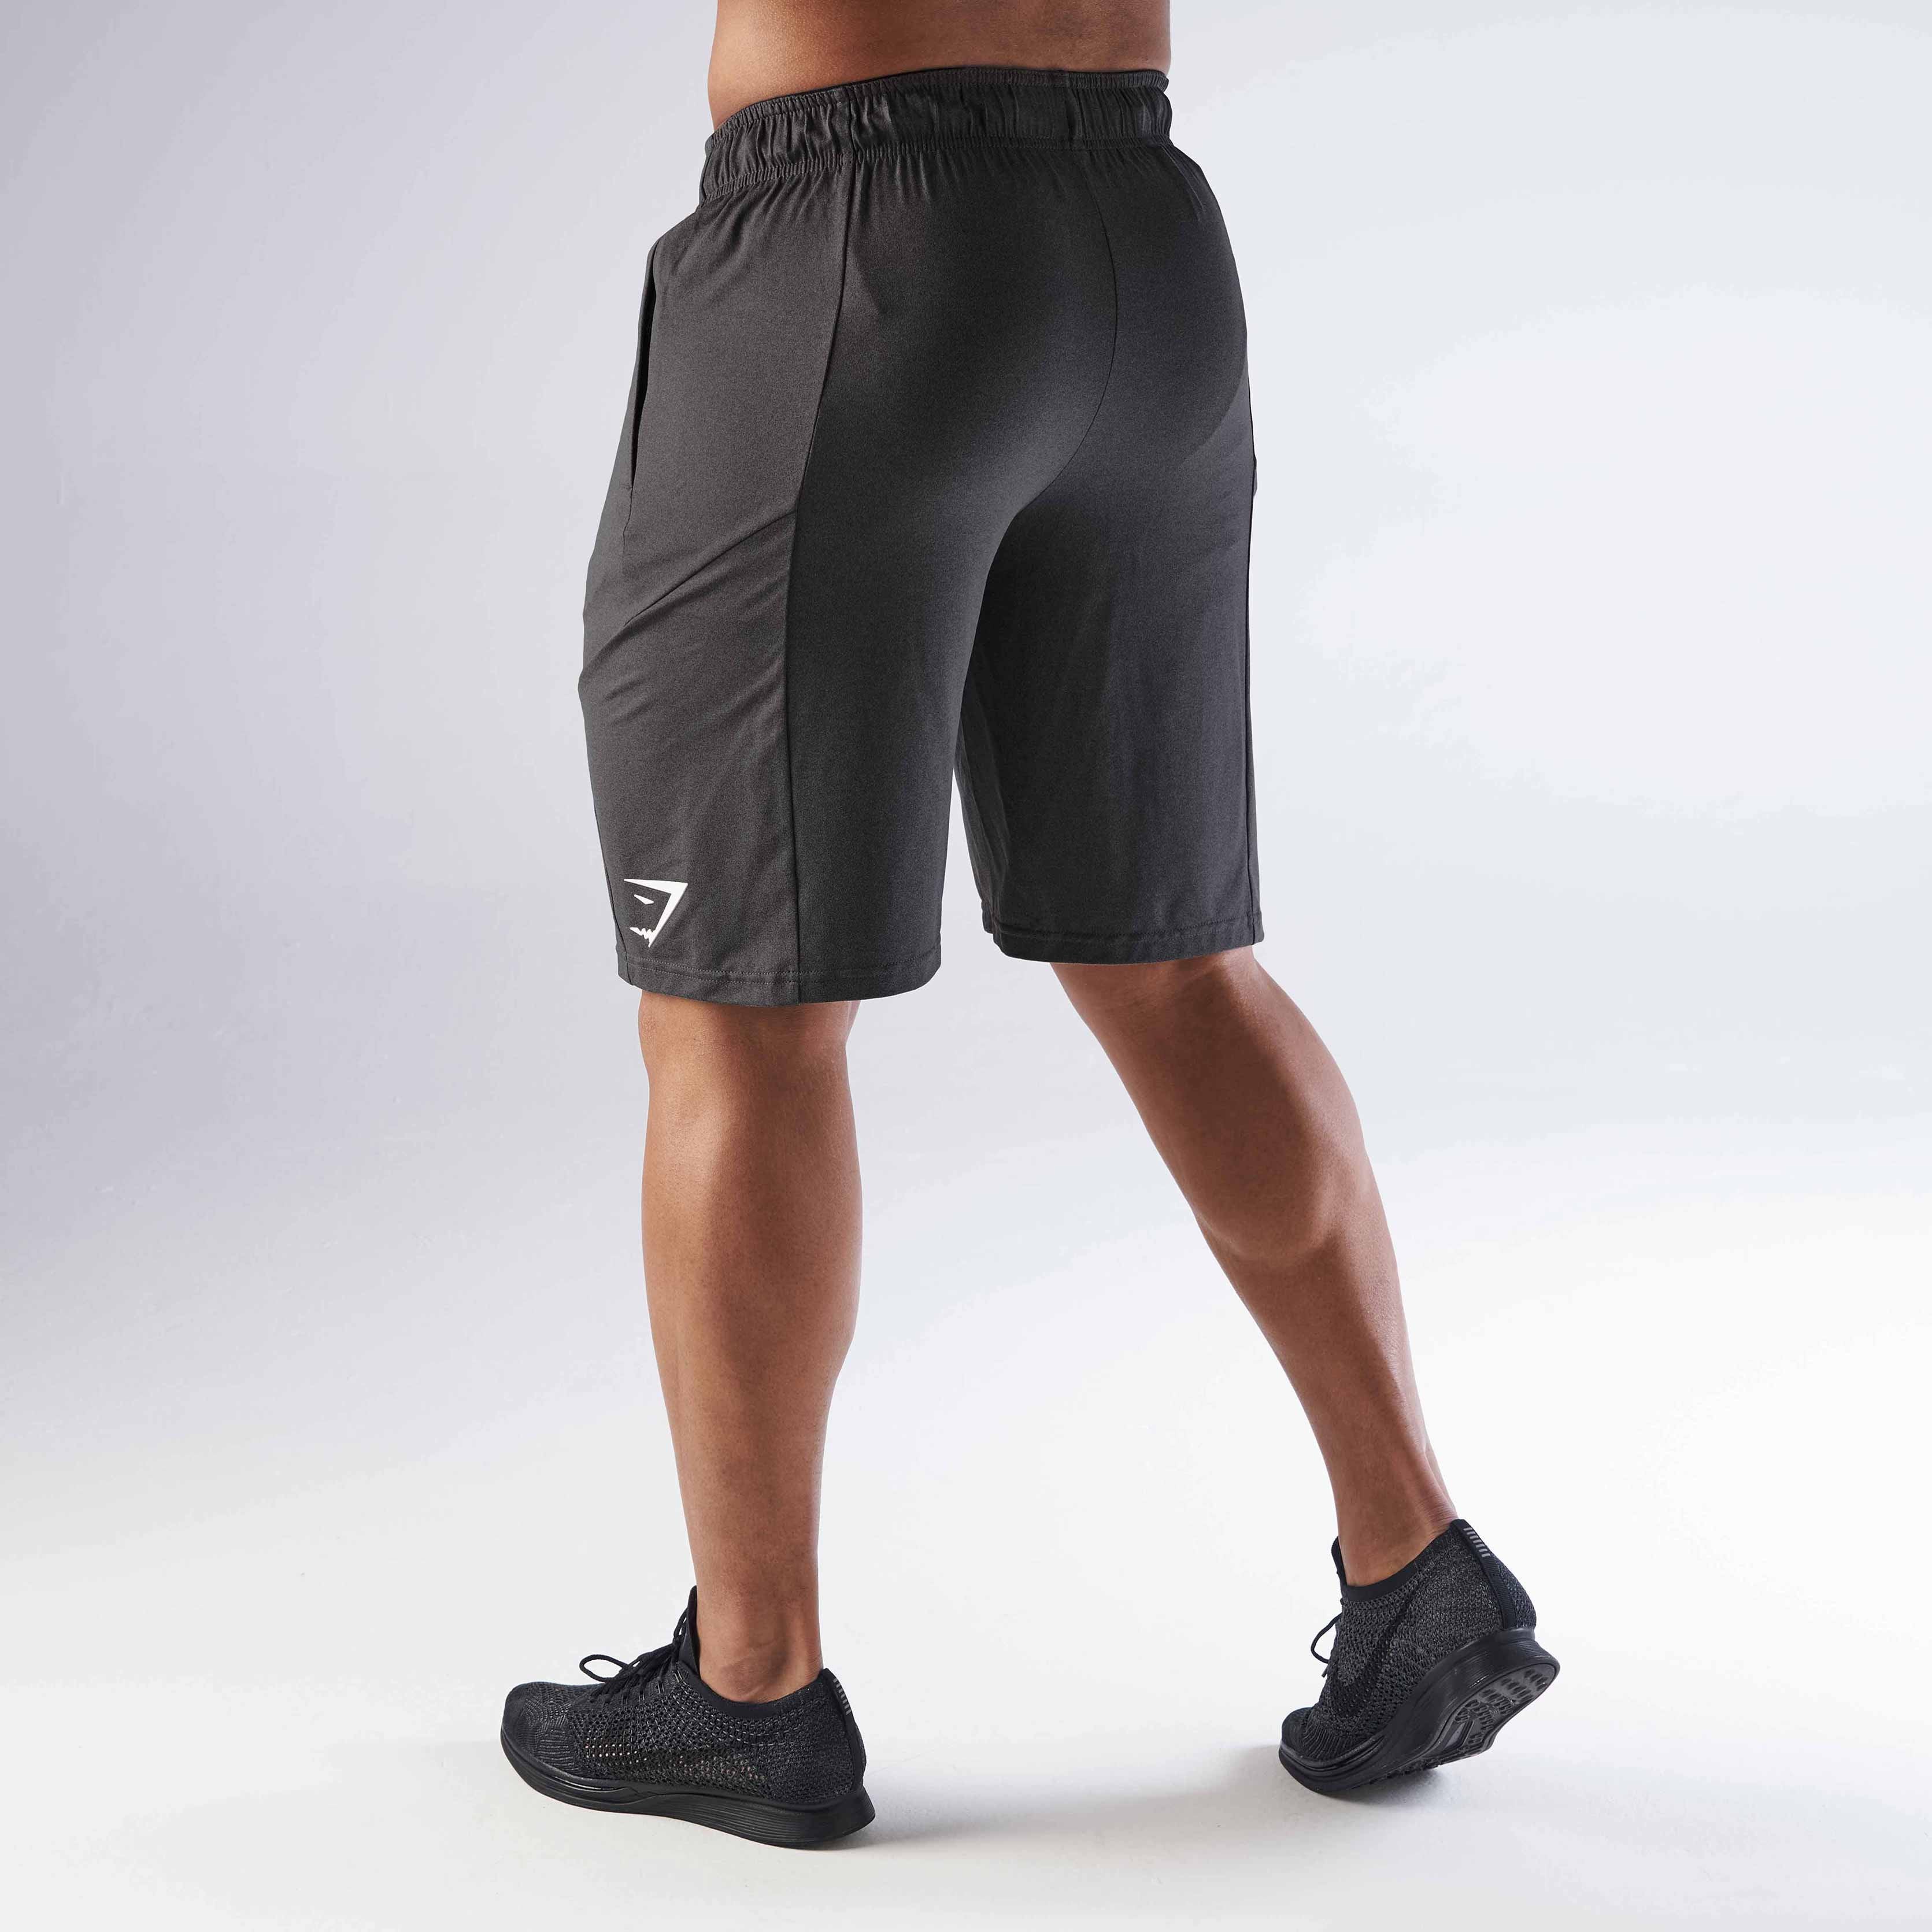 Element Shorts in Black Marl - view 4